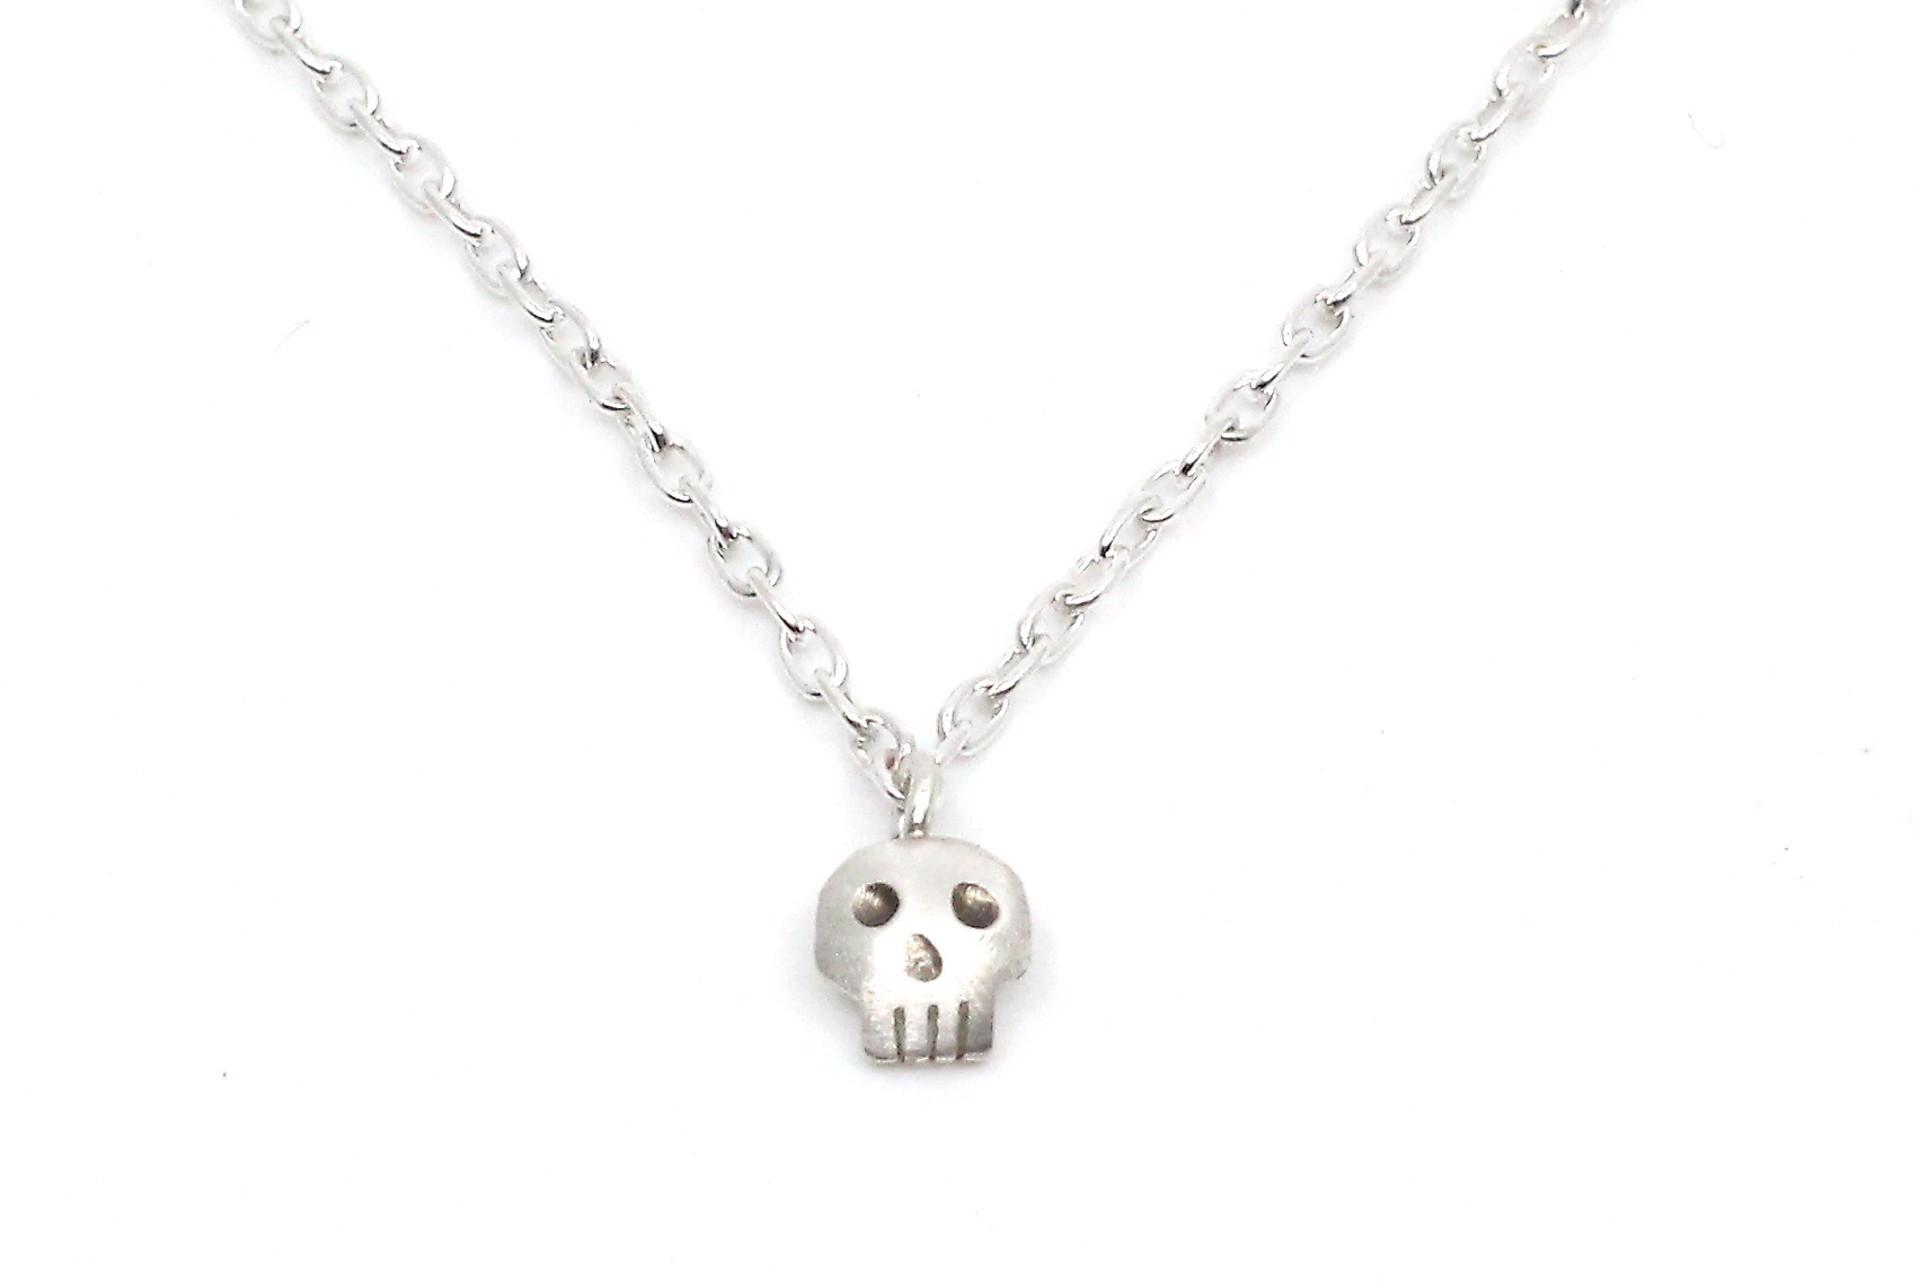 Single Skull Necklace by Susan Elnora